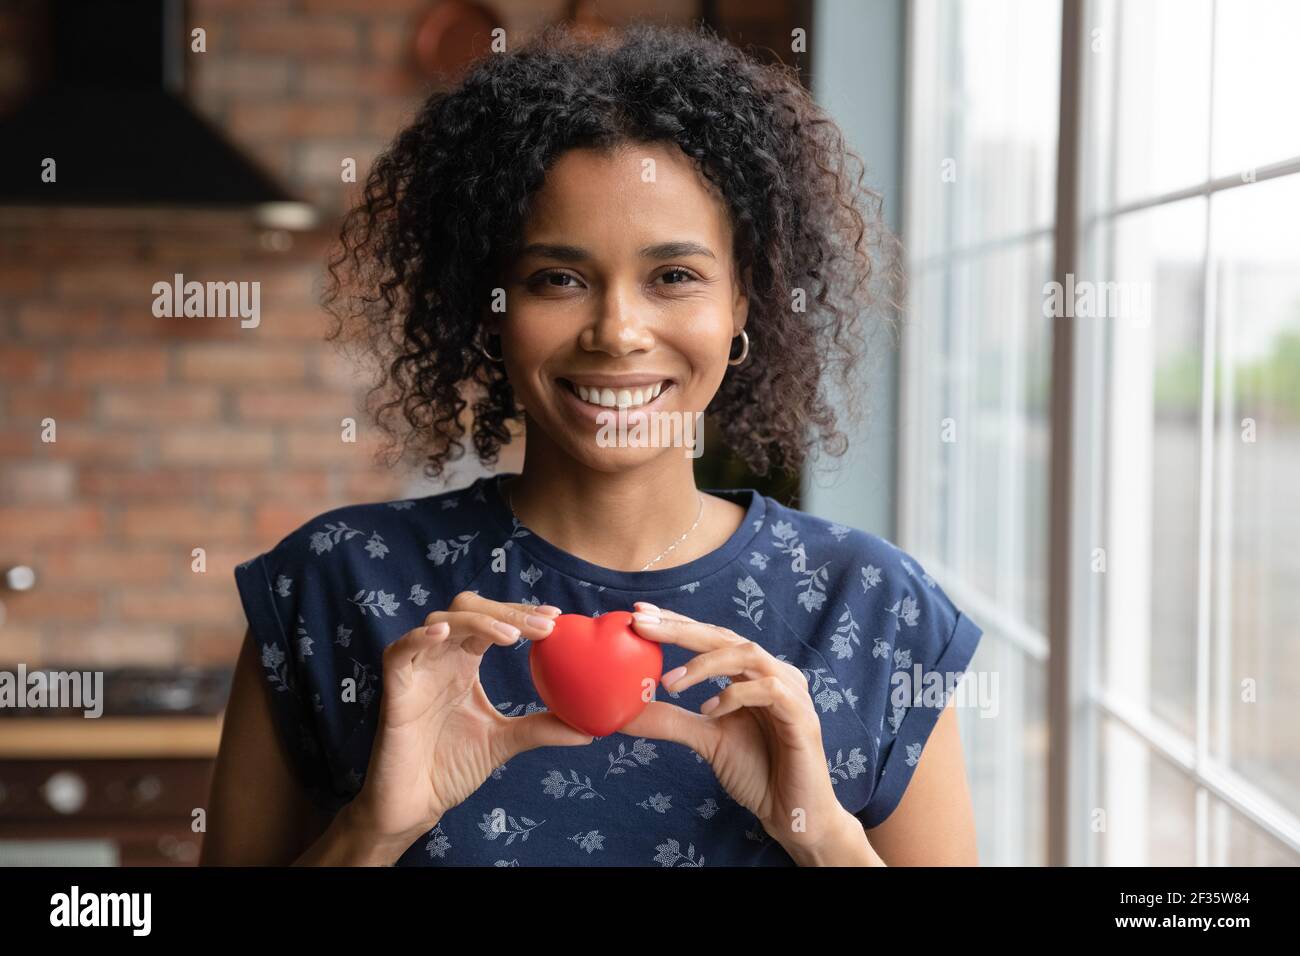 Happy black woman looking at camera holding red toy heart Stock Photo